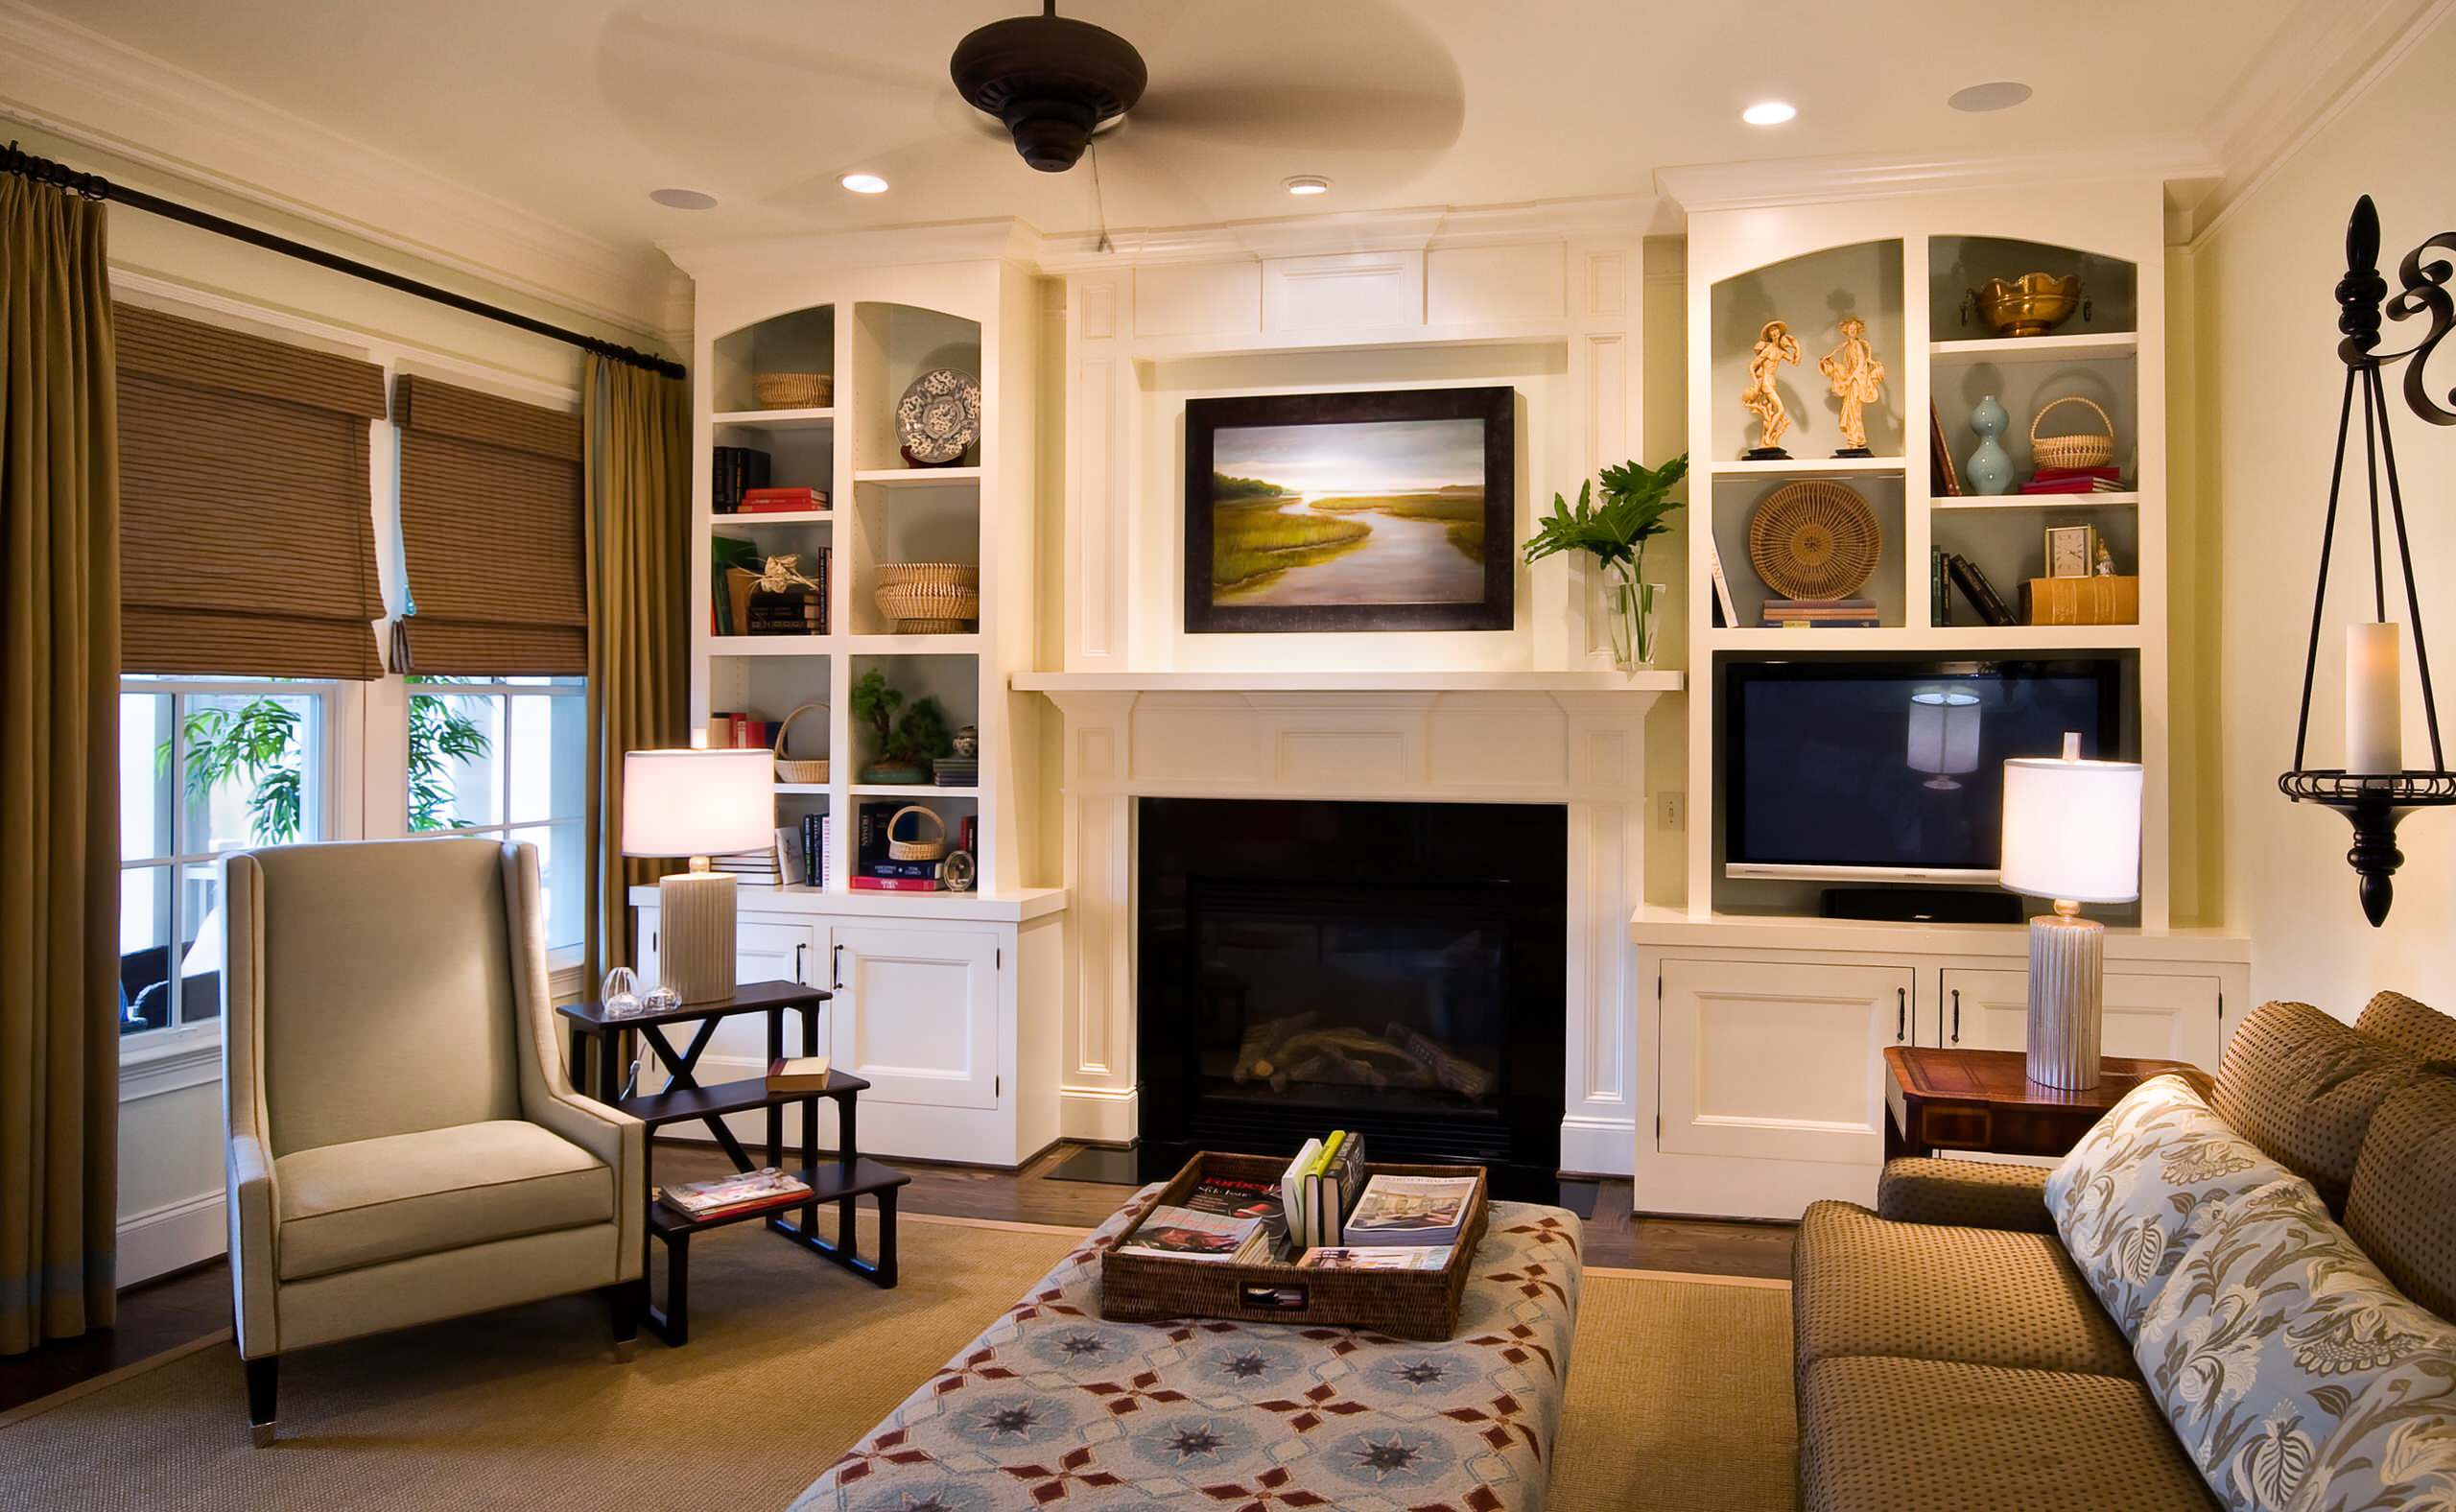 75 Living Room With A Media Wall Ideas You'Ll Love - August, 2023 | Houzz